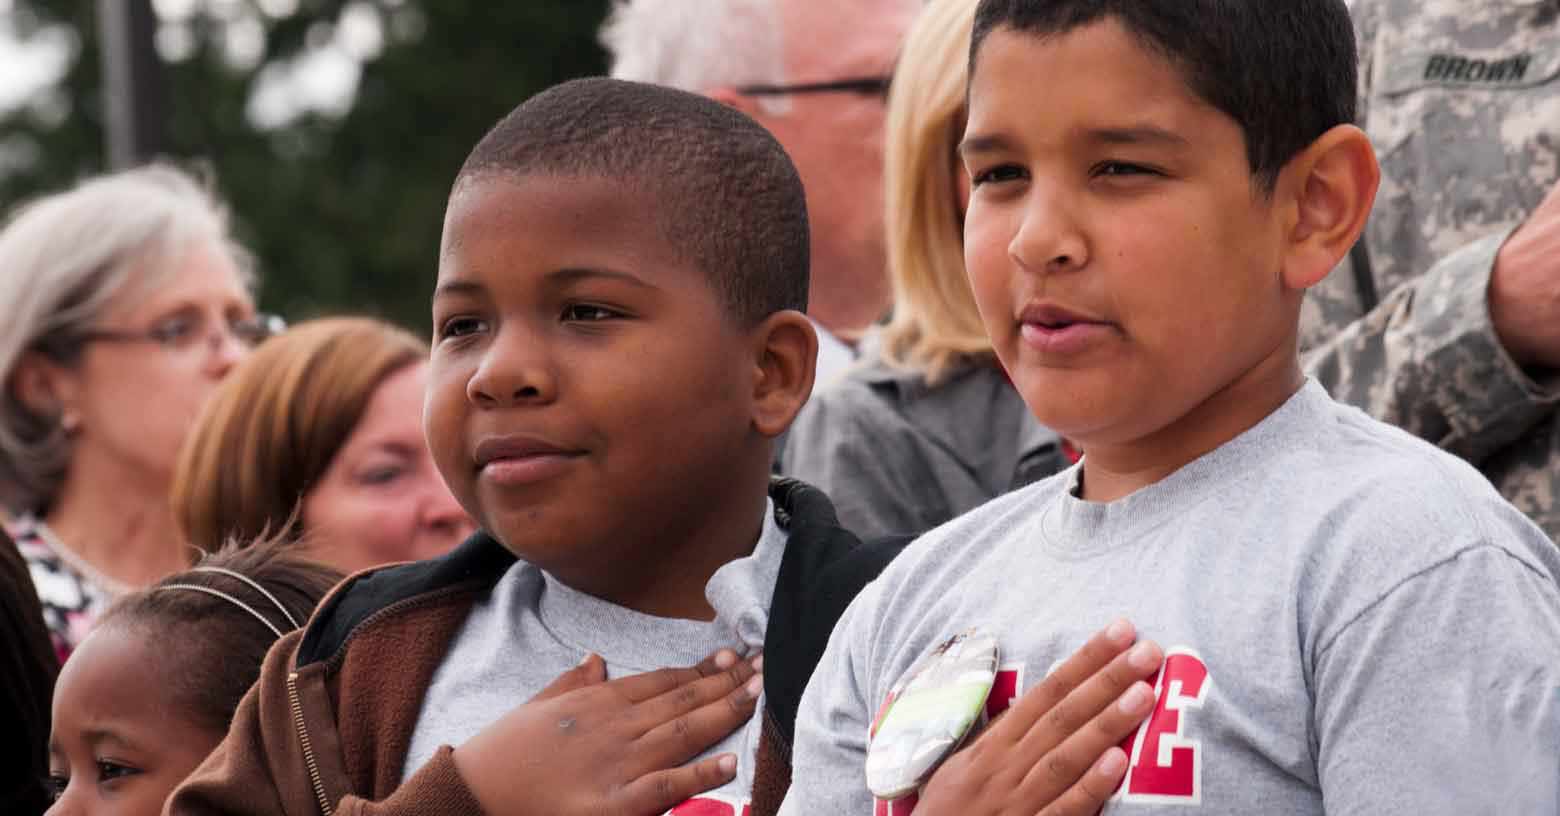 two young boys cite the pledge of allegiance